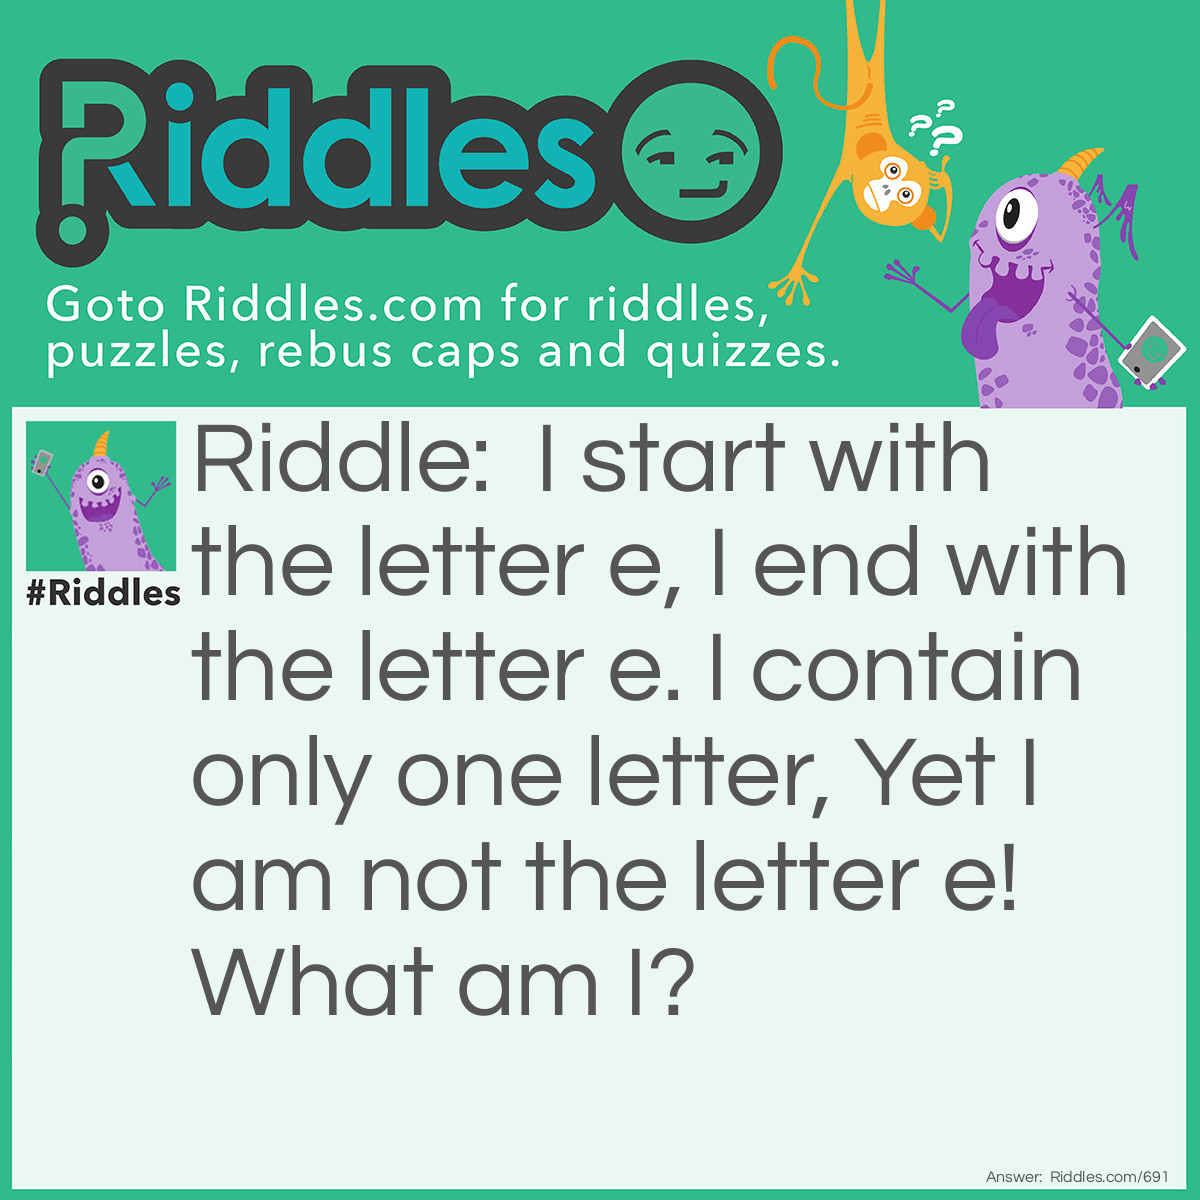 Riddle: I start with the letter e, I end with the letter e. I contain only one letter, Yet I am not the letter e!
What am I? Answer: An Envelope.